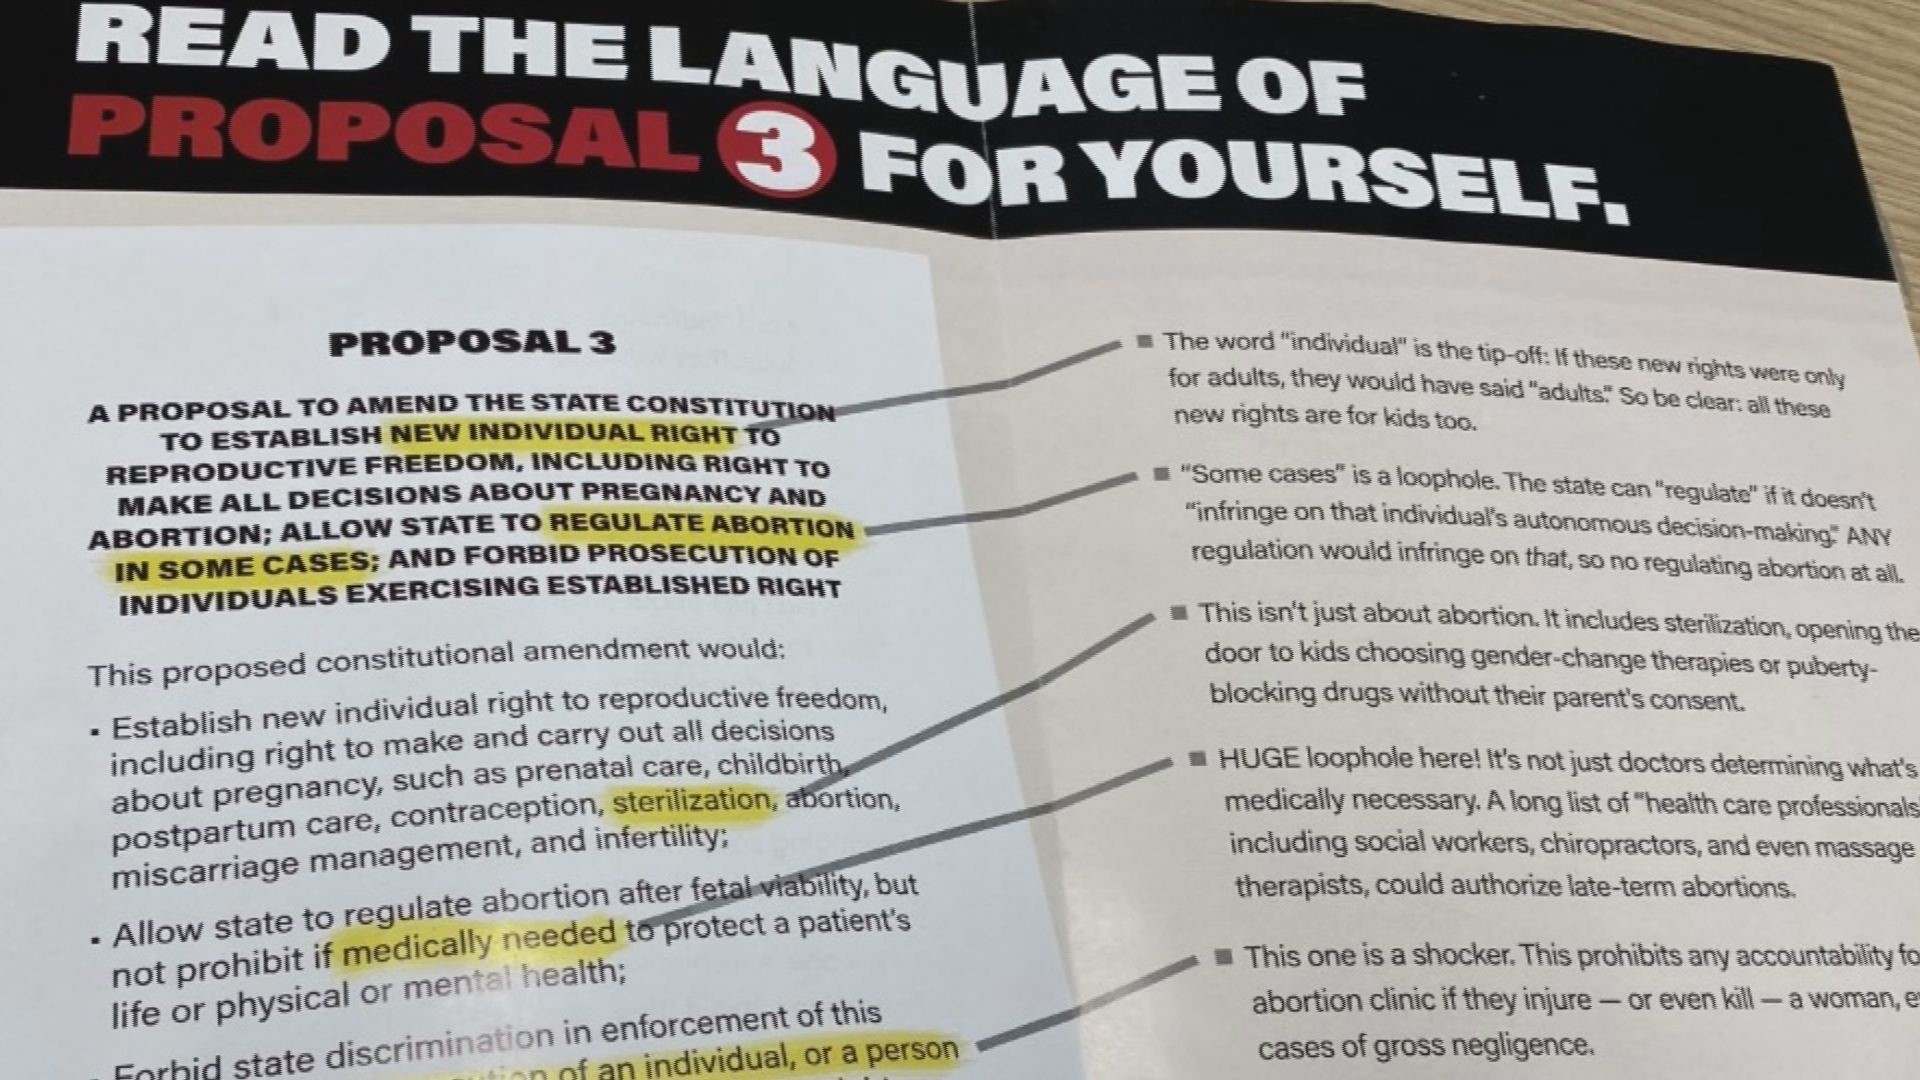 A Right to Life of Michigan pamphlet distributed through the mail encourages voters to 'read the proposal language for themselves.'